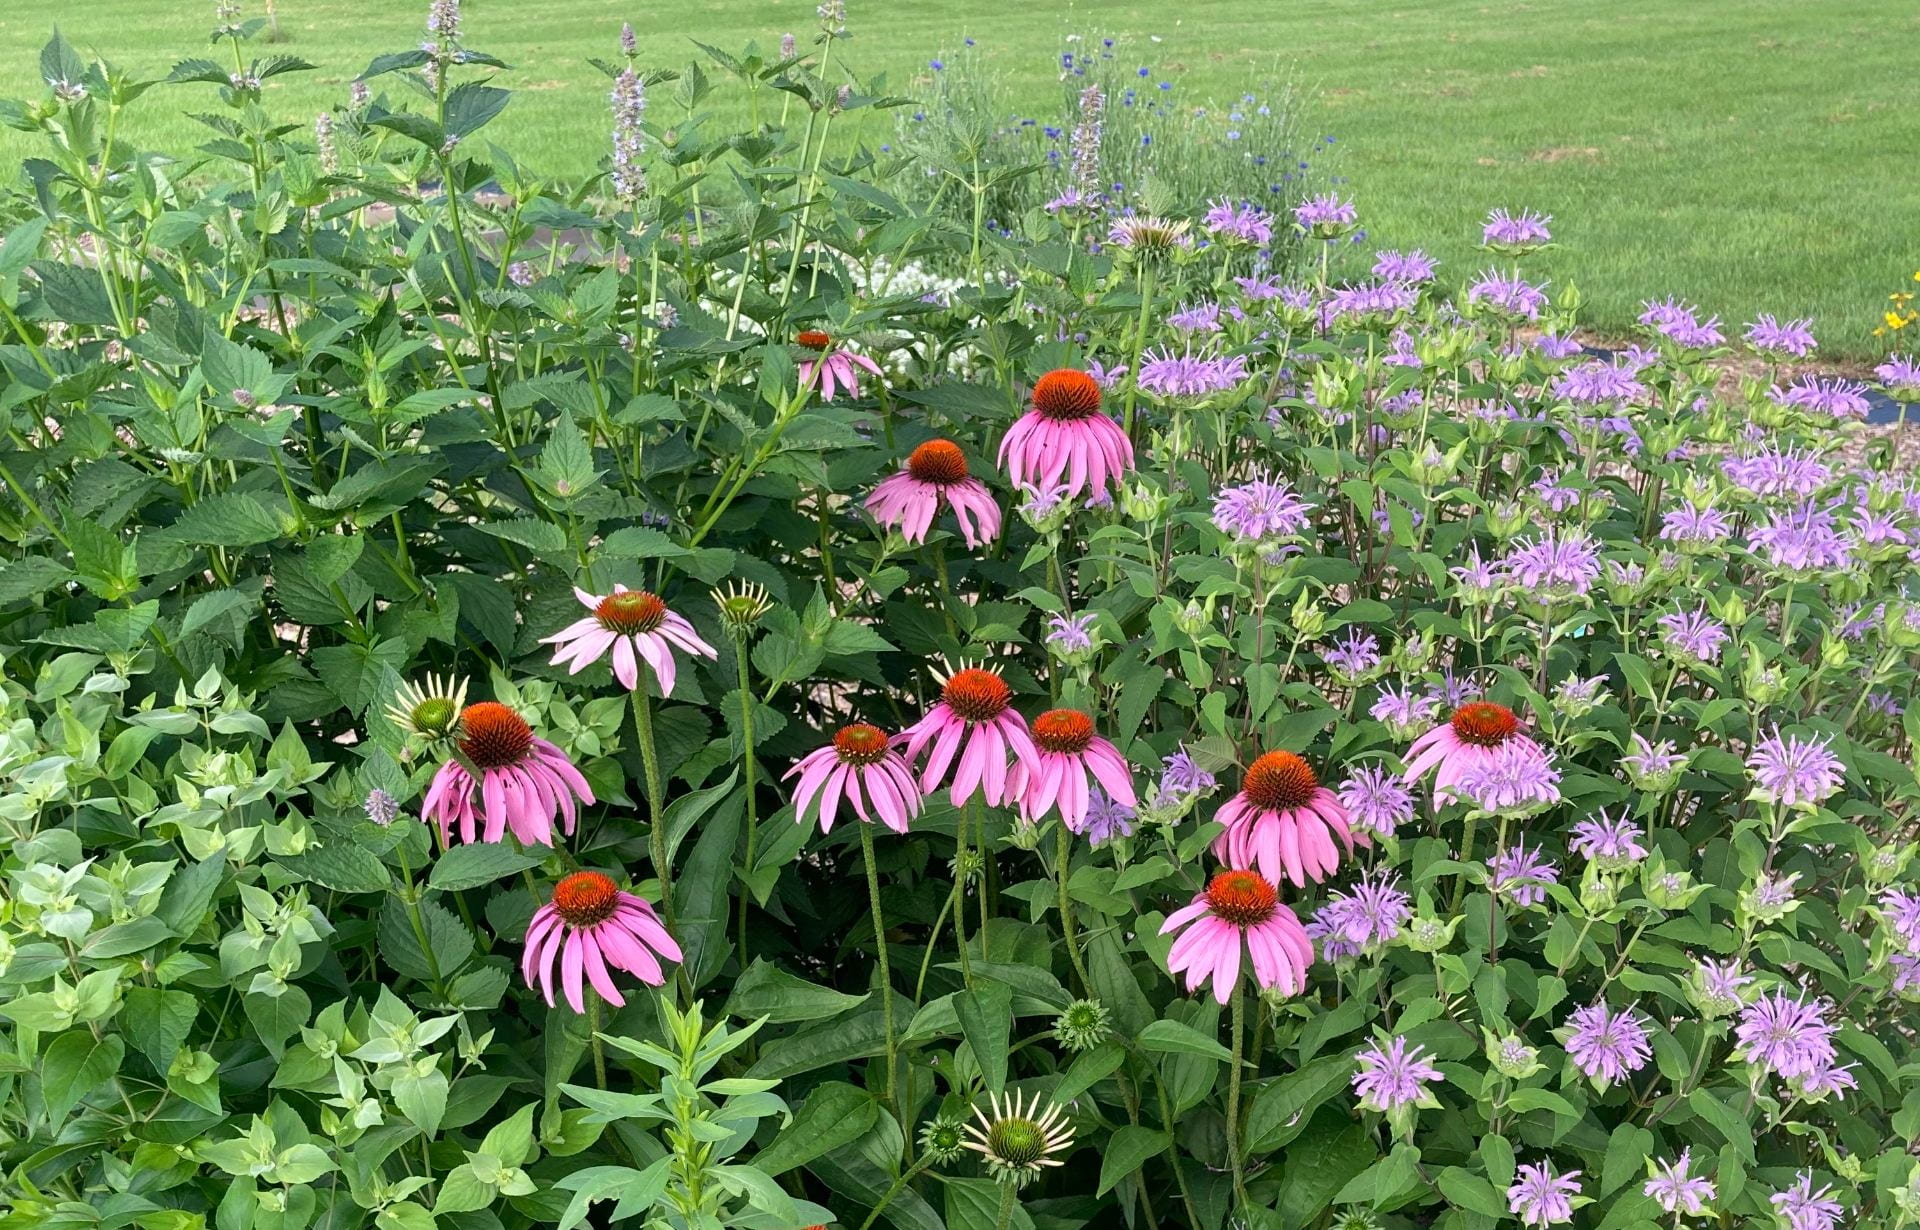 Pink echinacea, and pale purple wild bergamot flowers in a raised bed